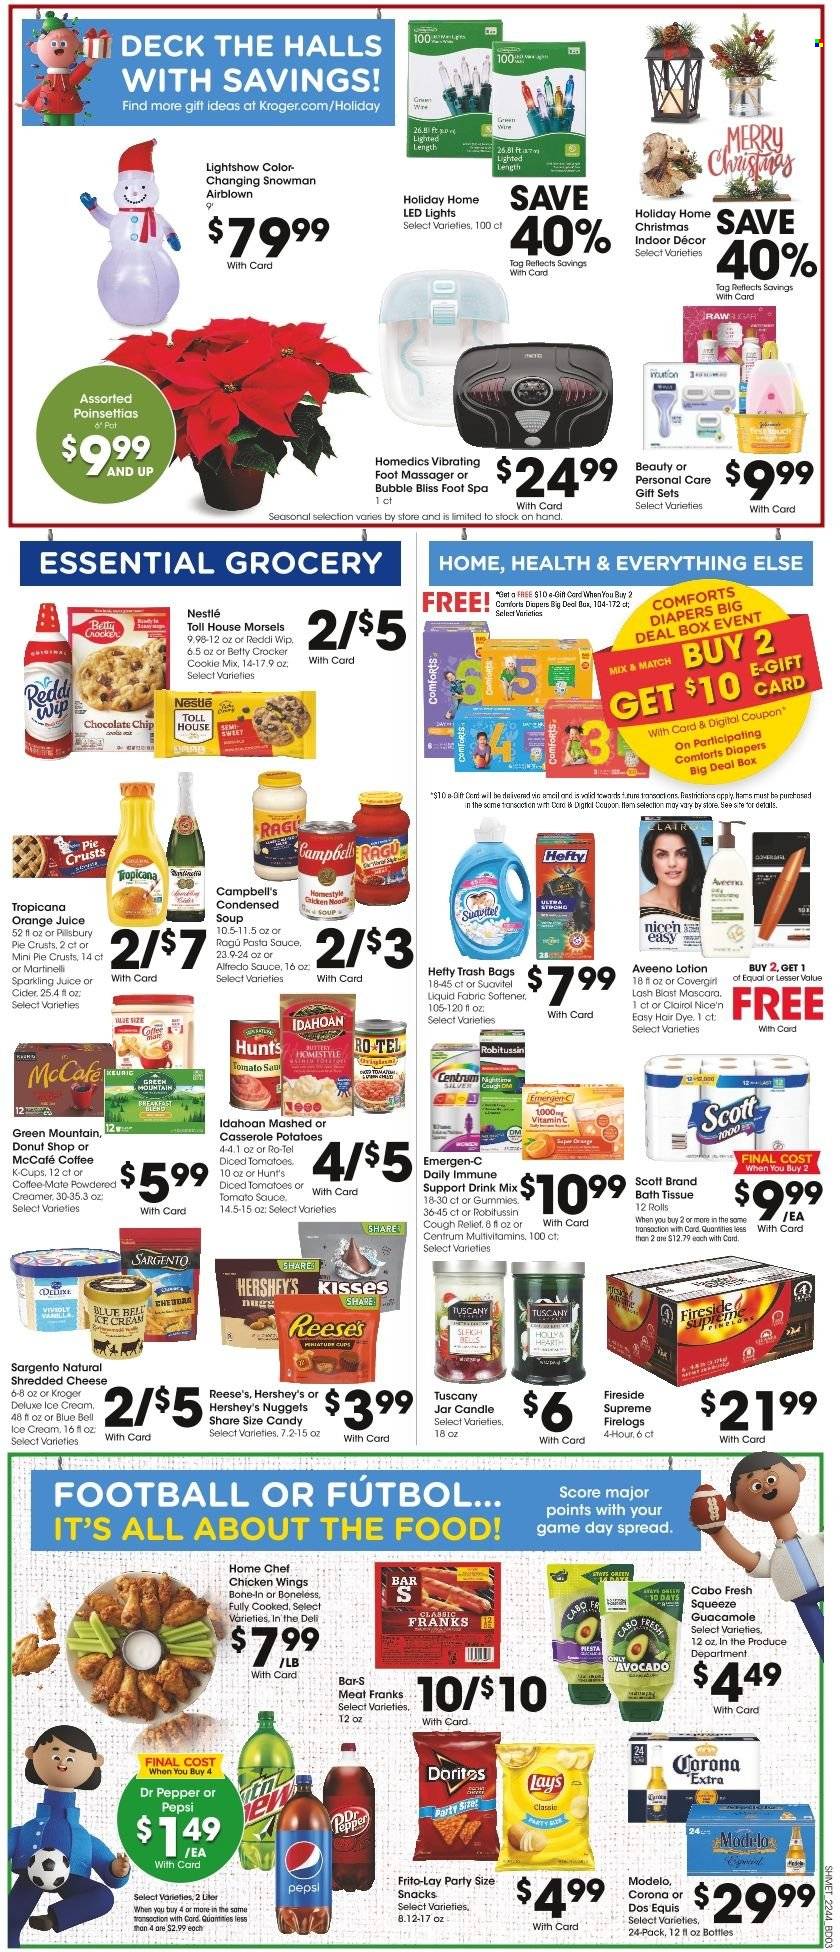 thumbnail - Kroger Flyer - 11/30/2022 - 12/06/2022 - Sales products - pie, Ace, tomatoes, Campbell's, pasta sauce, condensed soup, soup, nuggets, Pillsbury, instant soup, Alfredo sauce, ragú pasta, guacamole, shredded cheese, Sargento, Coffee-Mate, creamer, ice cream, Reese's, Hershey's, Blue Bell, chicken wings, Nestlé, Halls, chocolate chips, snack, Lay’s, Frito-Lay, pie crust, tomato sauce, diced tomatoes, ragu, Pepsi, orange juice, juice, Dr. Pepper, sparkling juice, coffee capsules, McCafe, K-Cups, Green Mountain, cider, beer, Corona Extra, Modelo, nappies, Aveeno, bath tissue, Scott, fabric softener, Clairol, body lotion, Hefty, trash bags, mascara, pot, casserole, candle, massager, foot massager, foot spa, LED light, poinsettia, multivitamin, Robitussin, vitamin c, Emergen-C, Centrum, Dos Equis. Page 6.